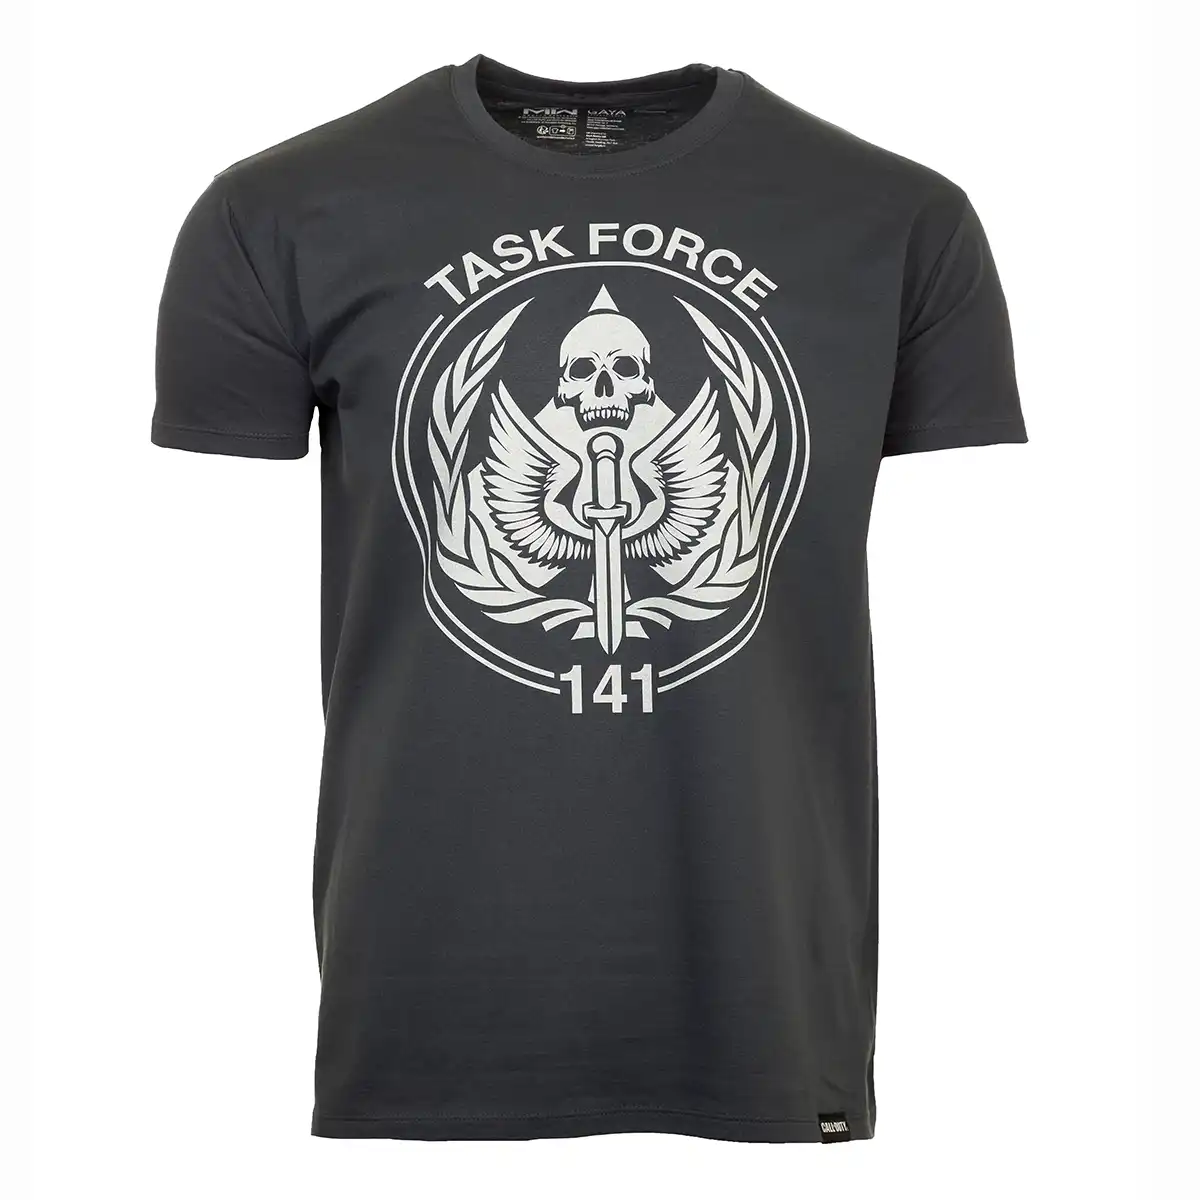 Call of Duty T-Shirt "Task Force Icon" Mousegrey XXL